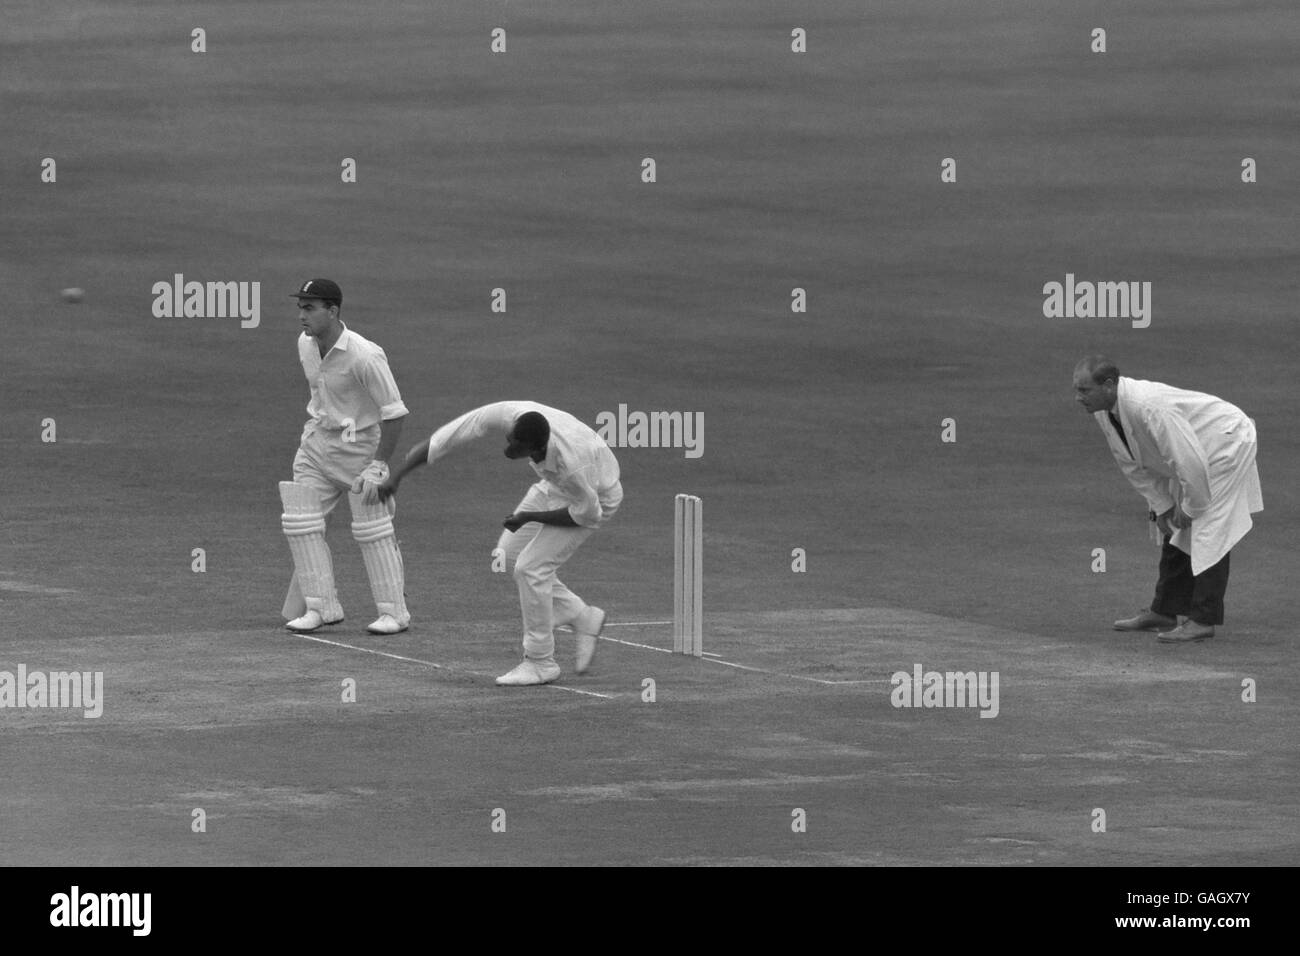 Cricket - Second Test Match - Fourth Day - England v West Indies - Lords Stock Photo